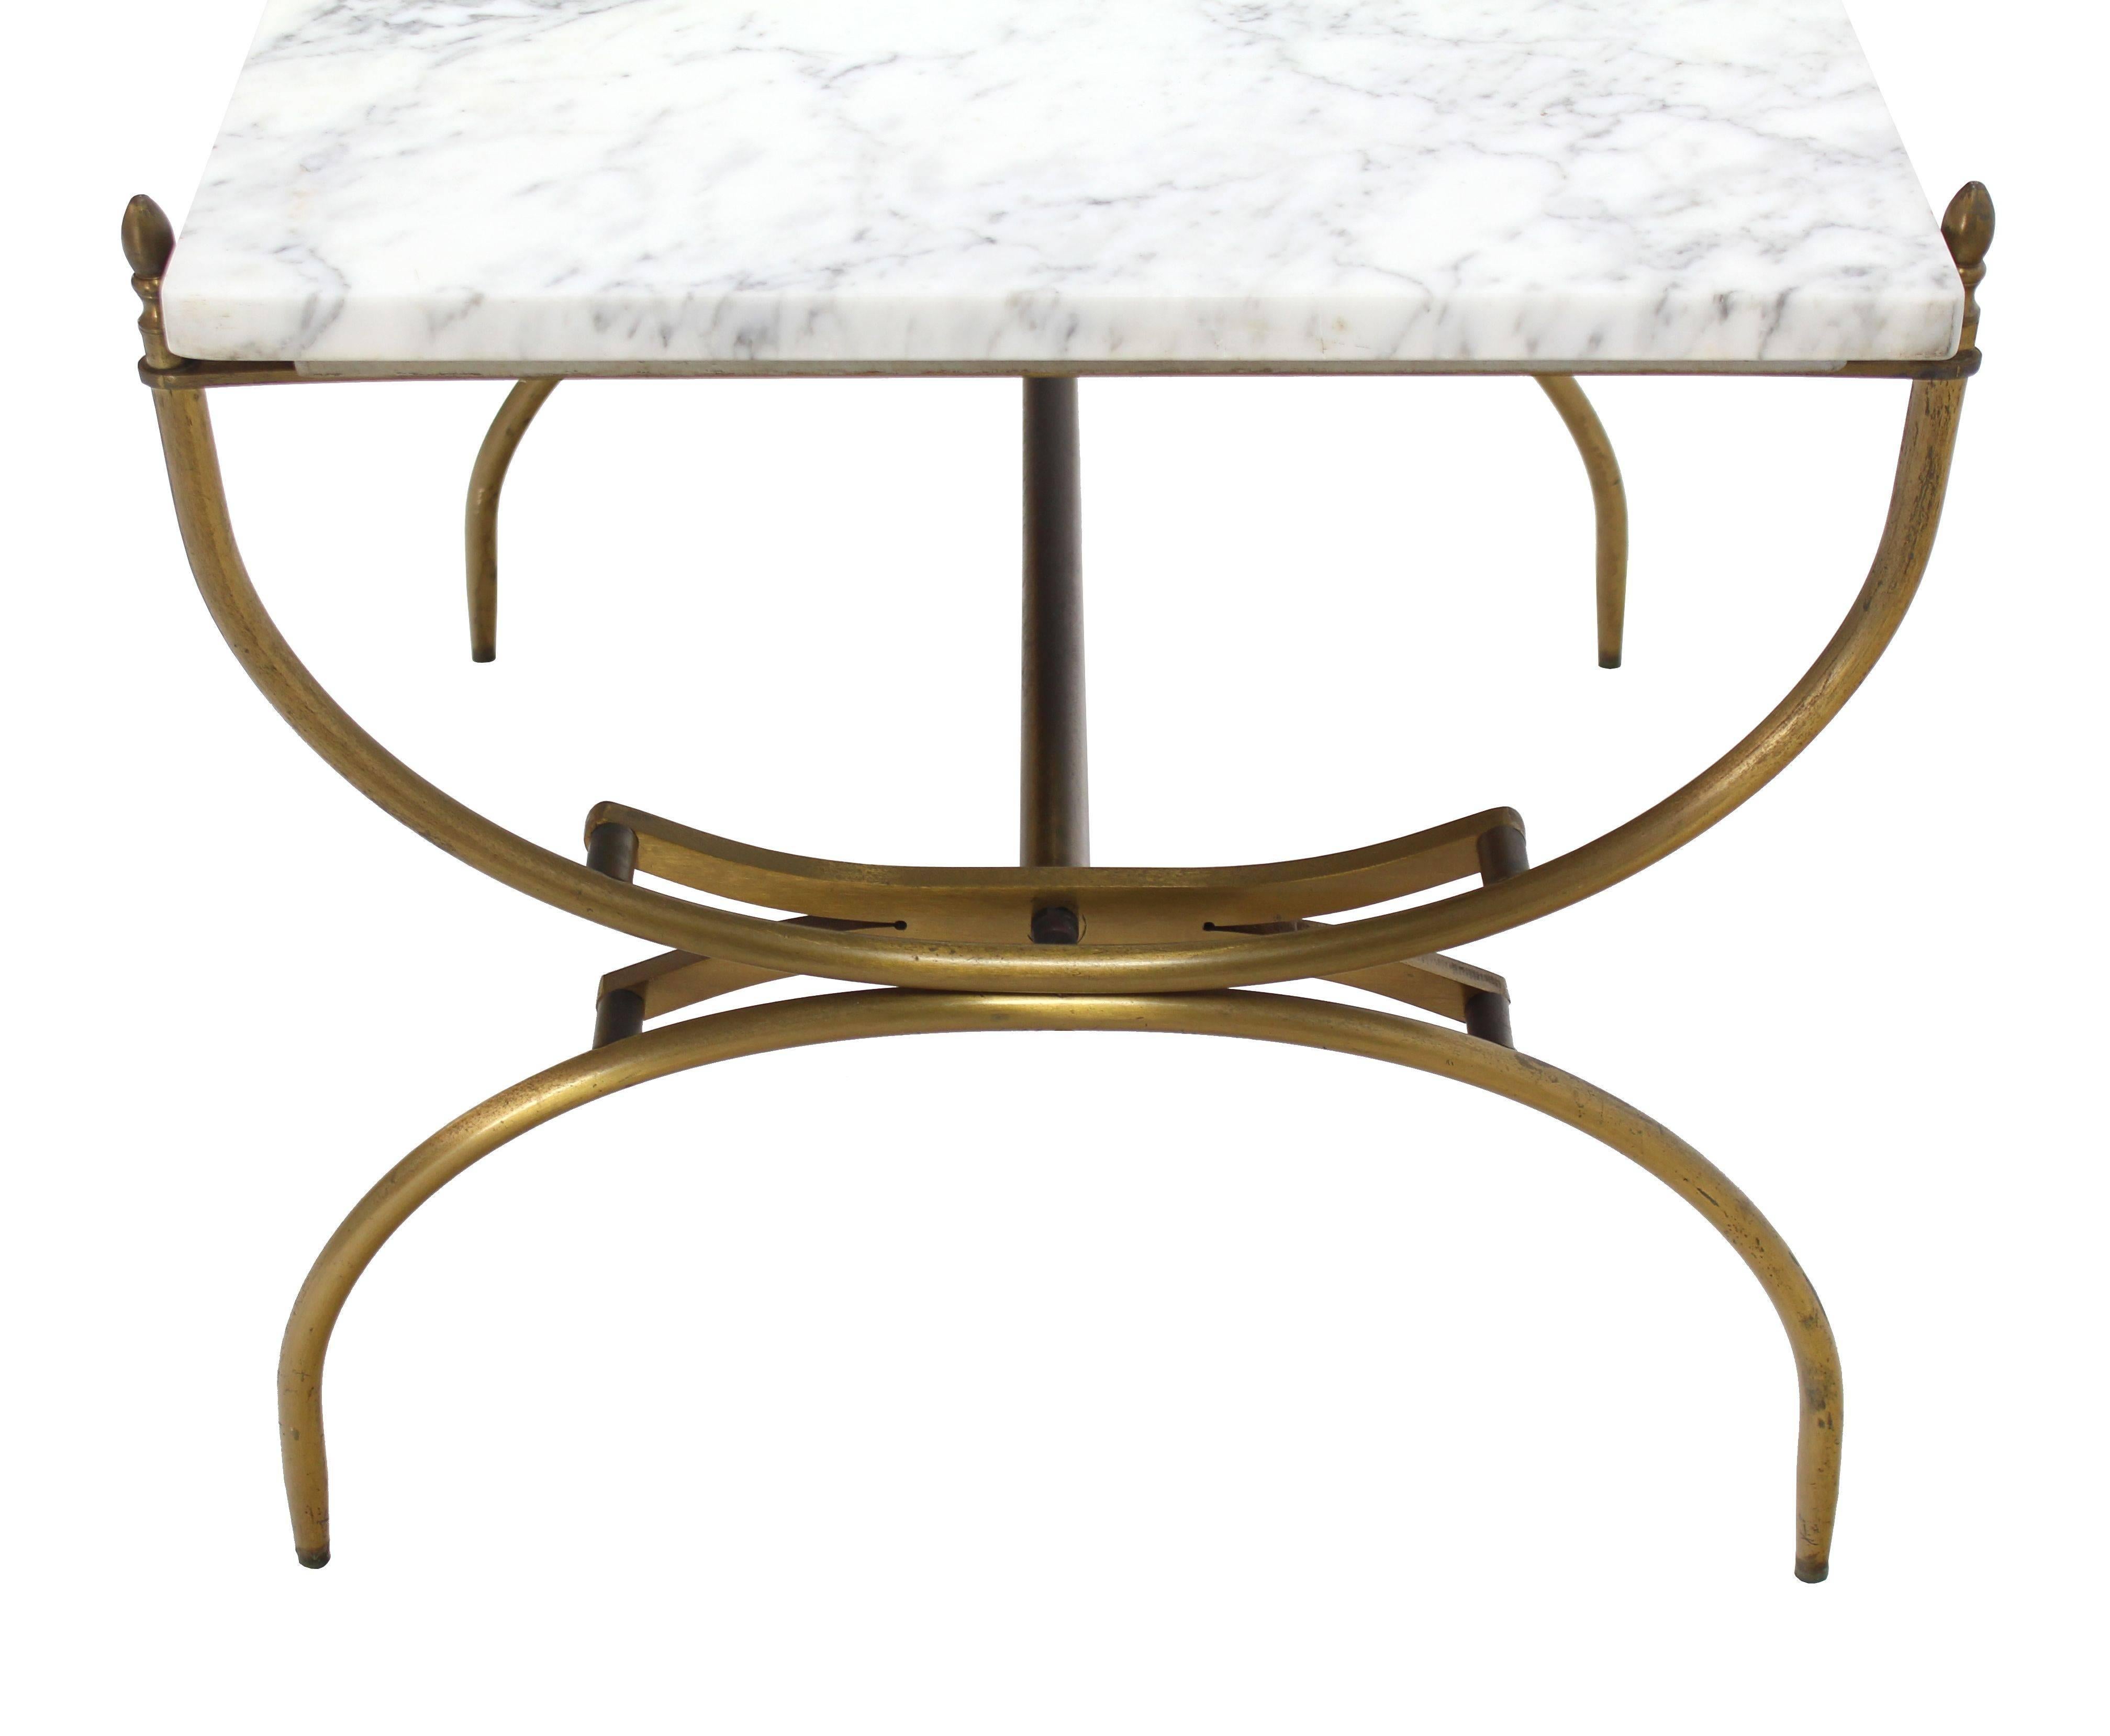 Solid Brass Marble Top Arch Shape Legs Side Table In Excellent Condition For Sale In Rockaway, NJ